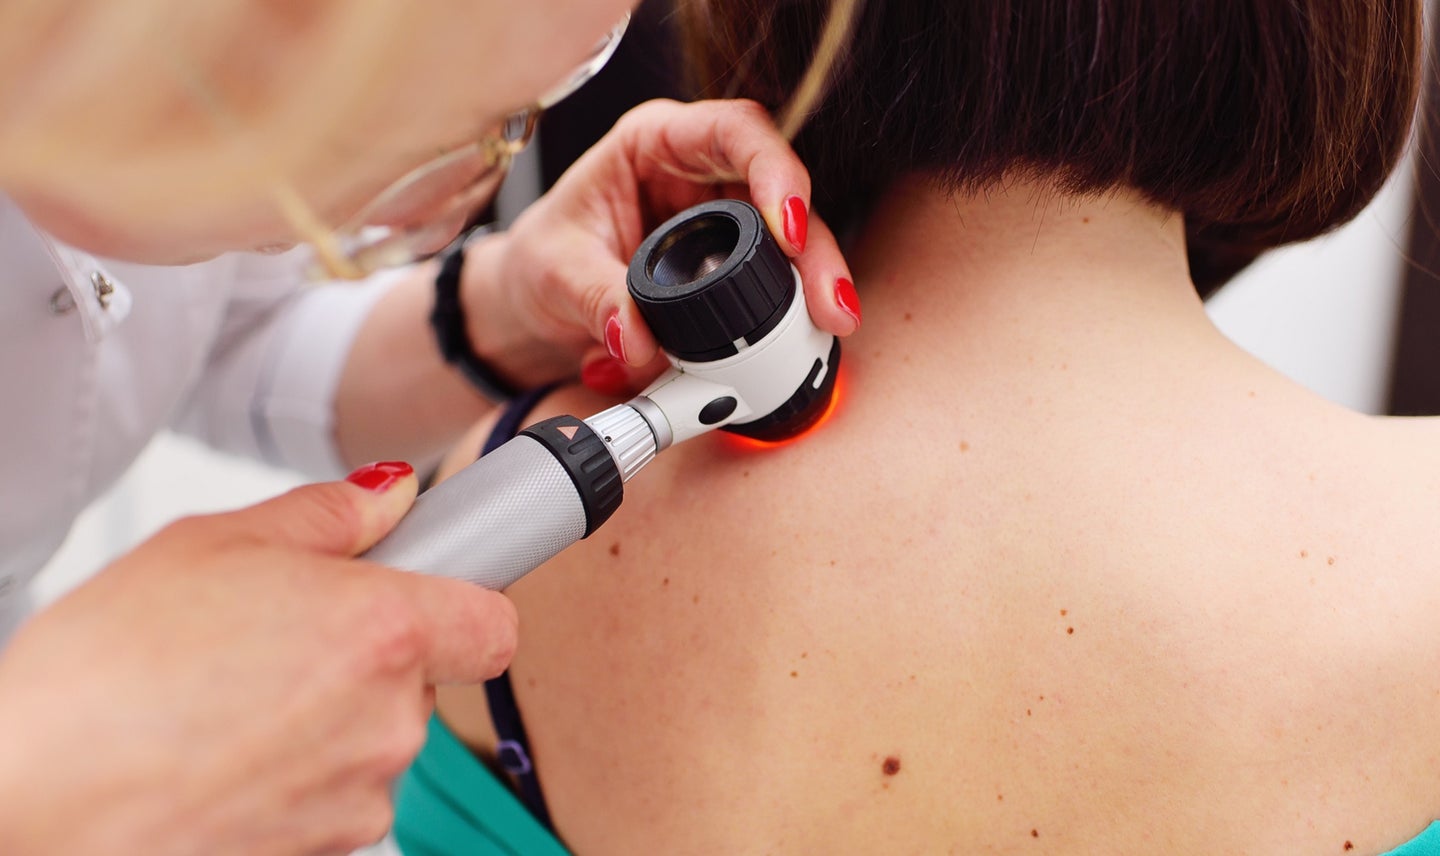 Dermatologist checking moles on skin cancer patient's back